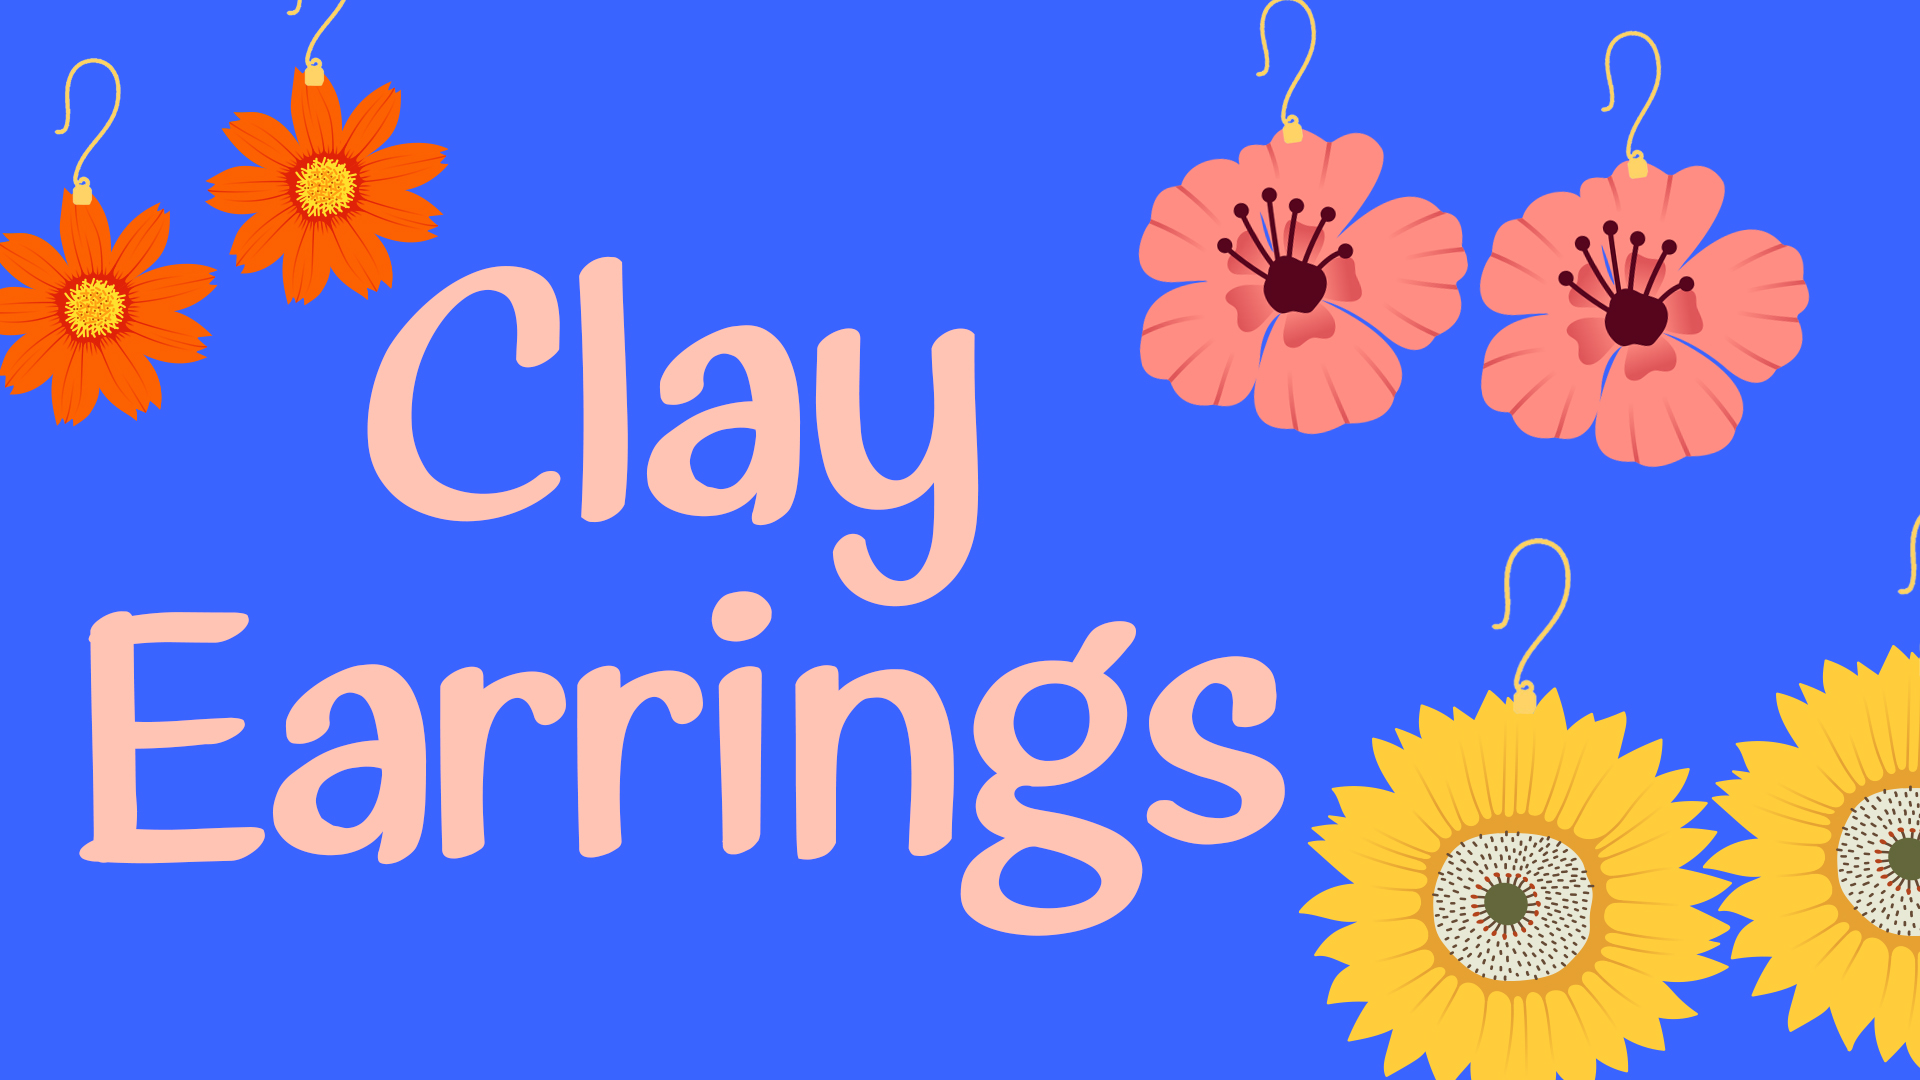 Image reads "Clay Earrings" against a blue background. Three sets of floral earrings are scattered among the image. 